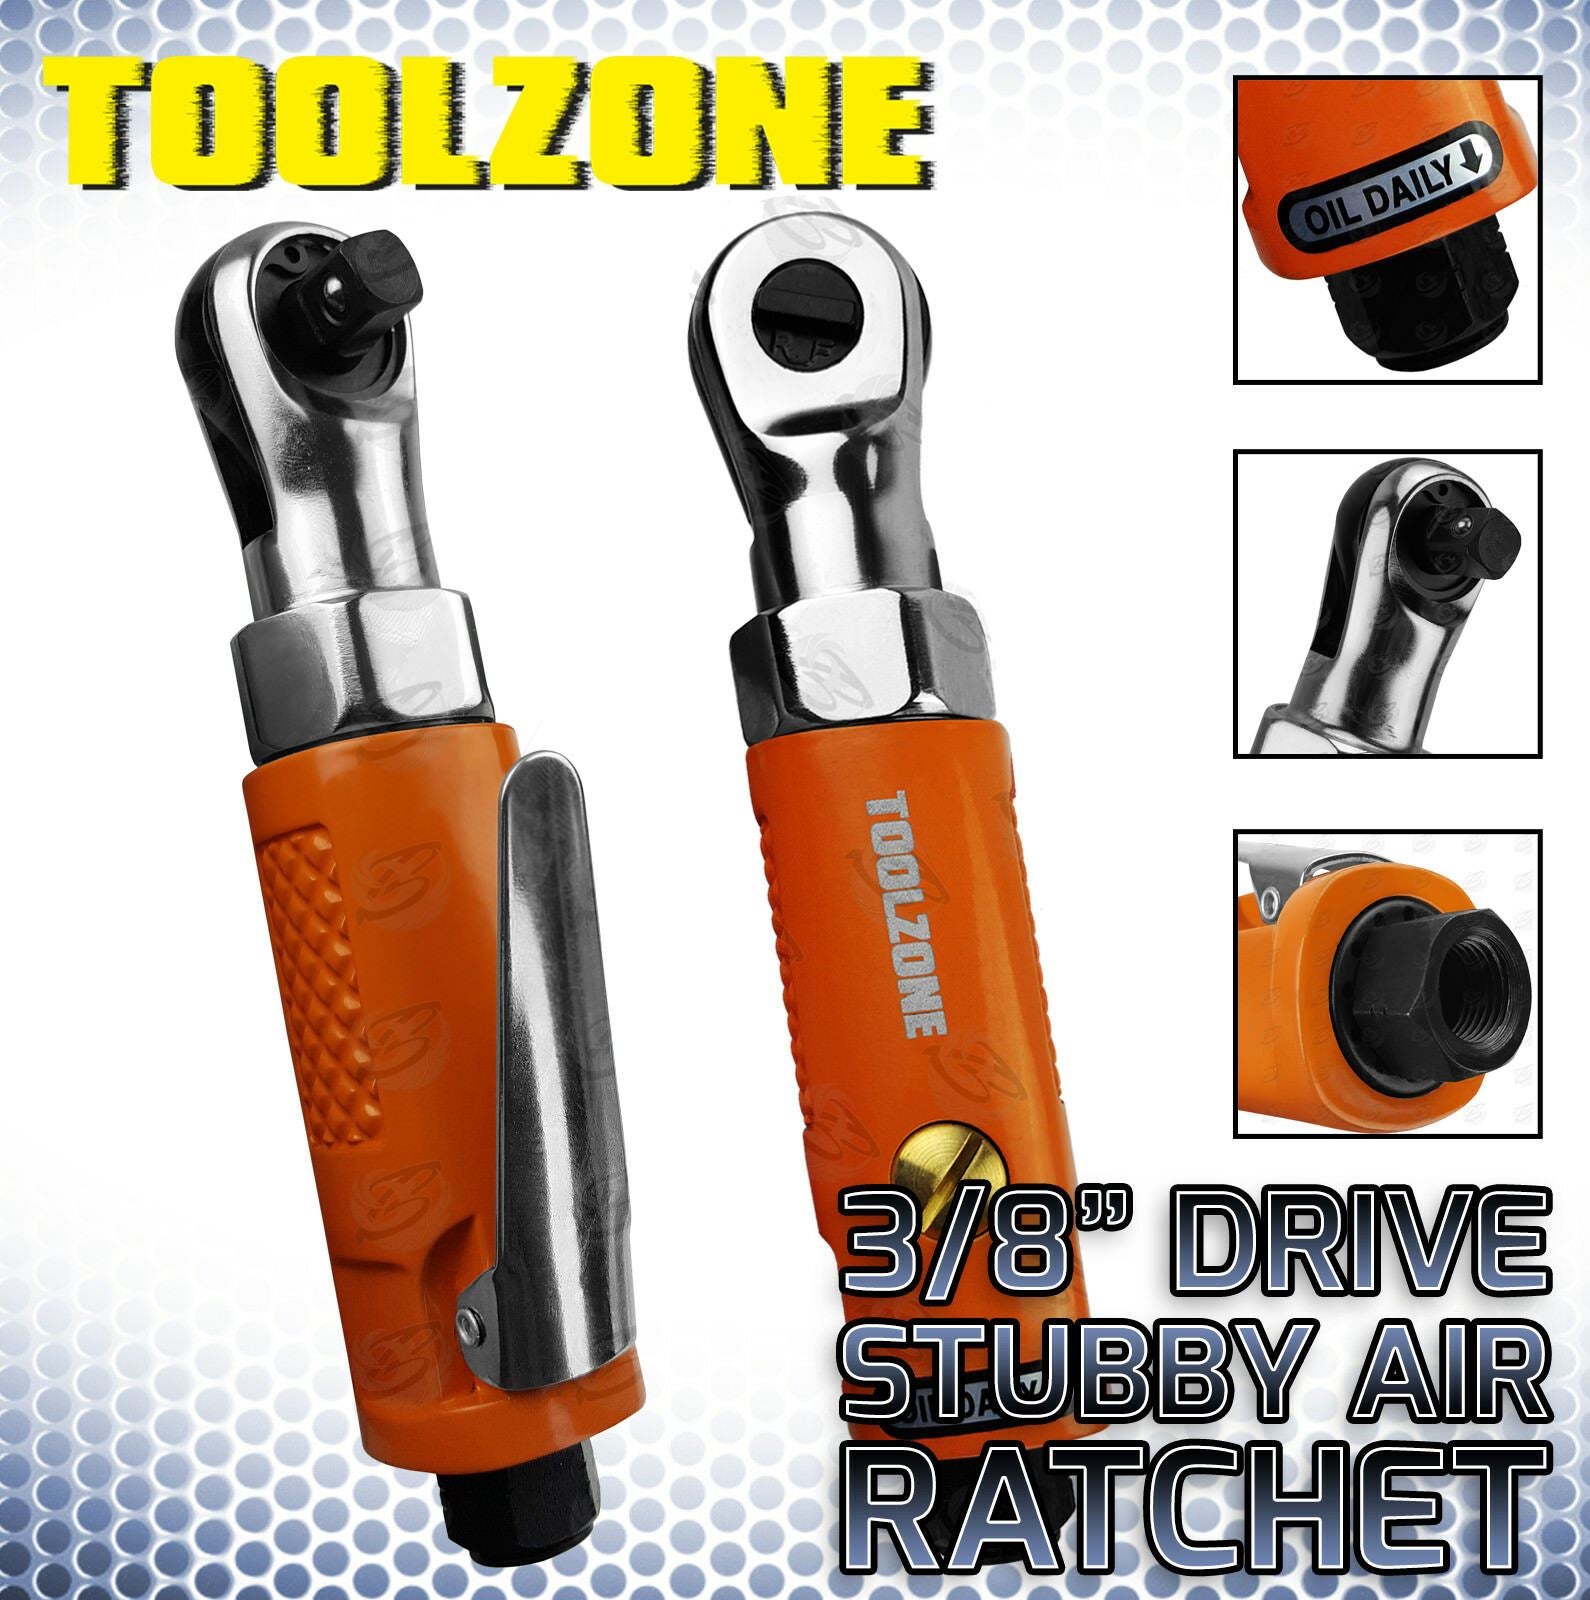 TOOLZONE 3/8" DRIVE STUBBY AIR IMPACT RATCHET WRENCH